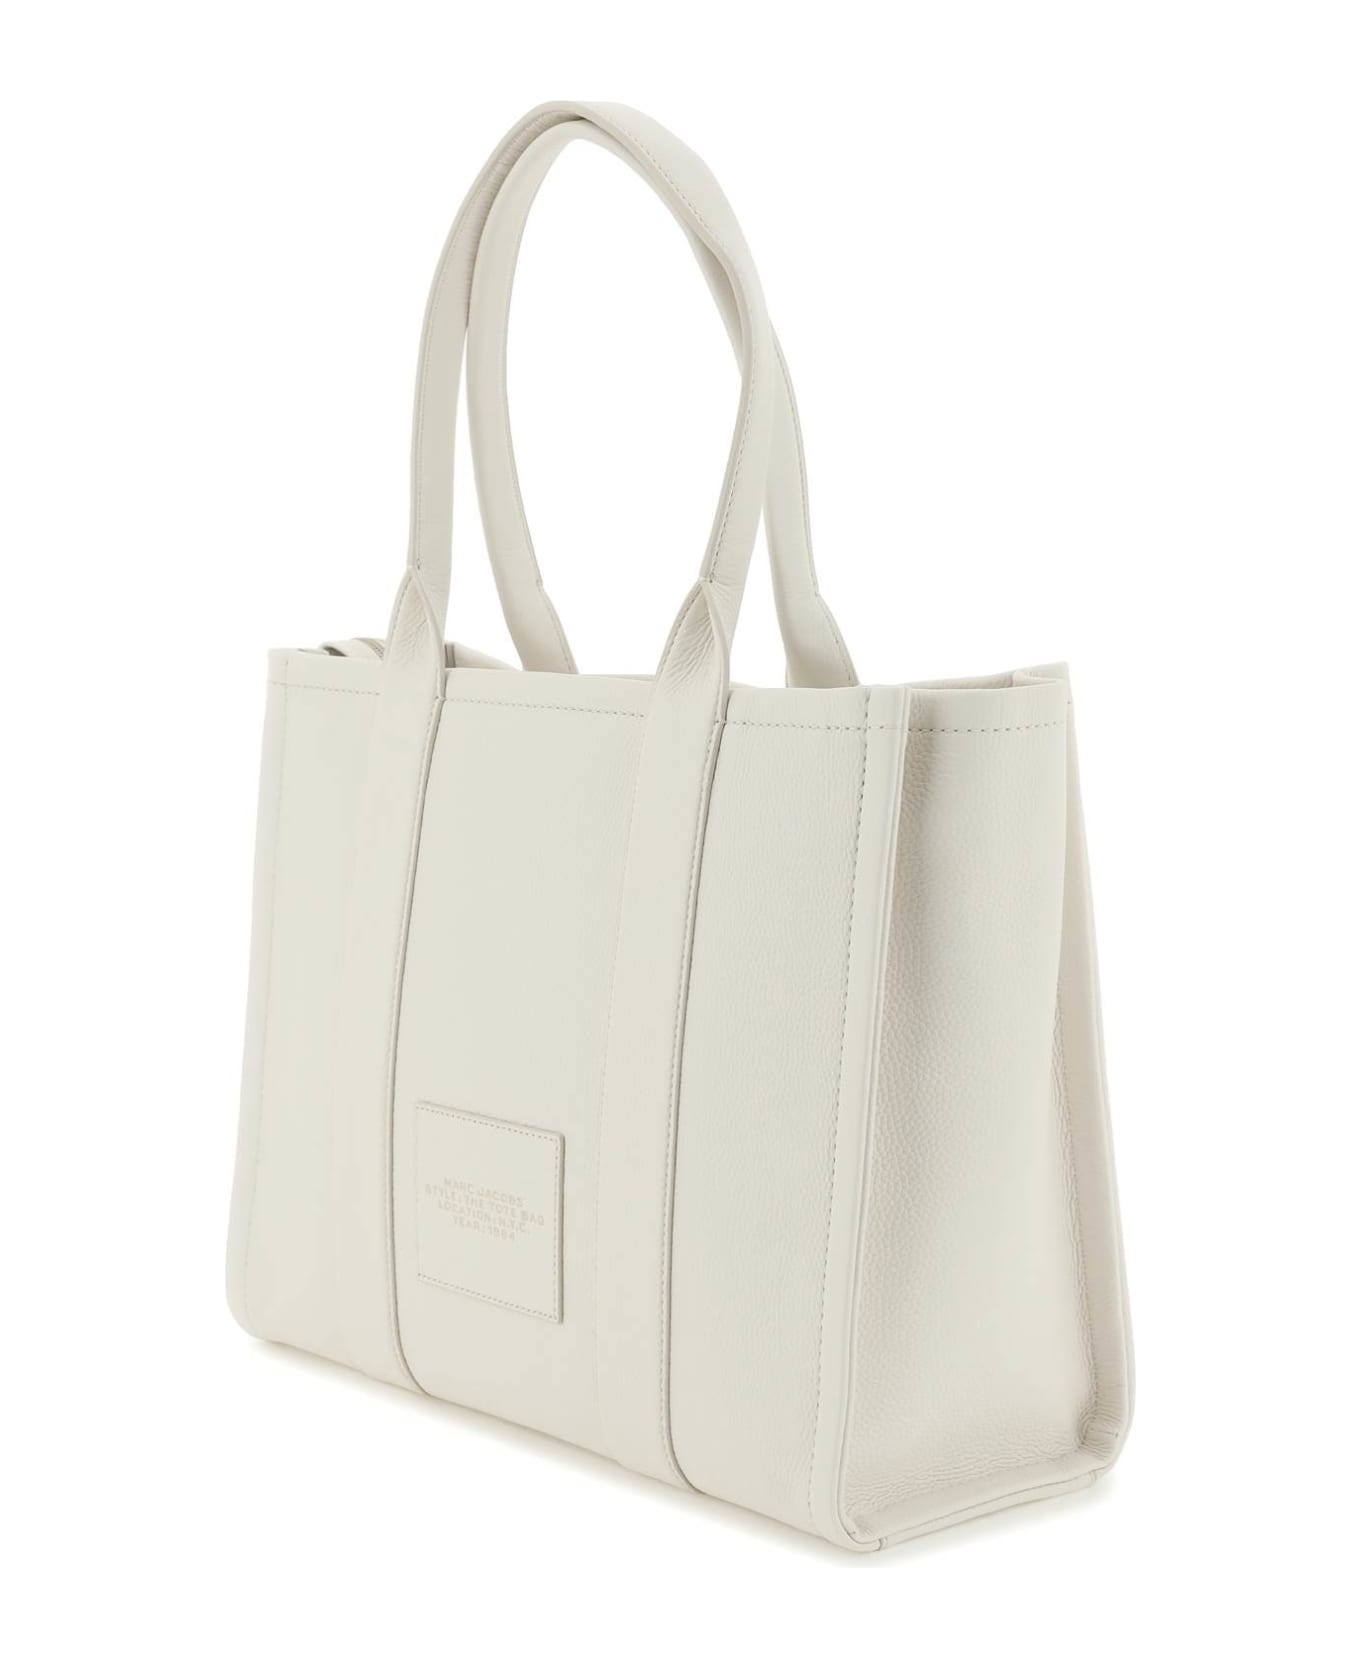 Marc Jacobs Leather Tote Bag - Cream